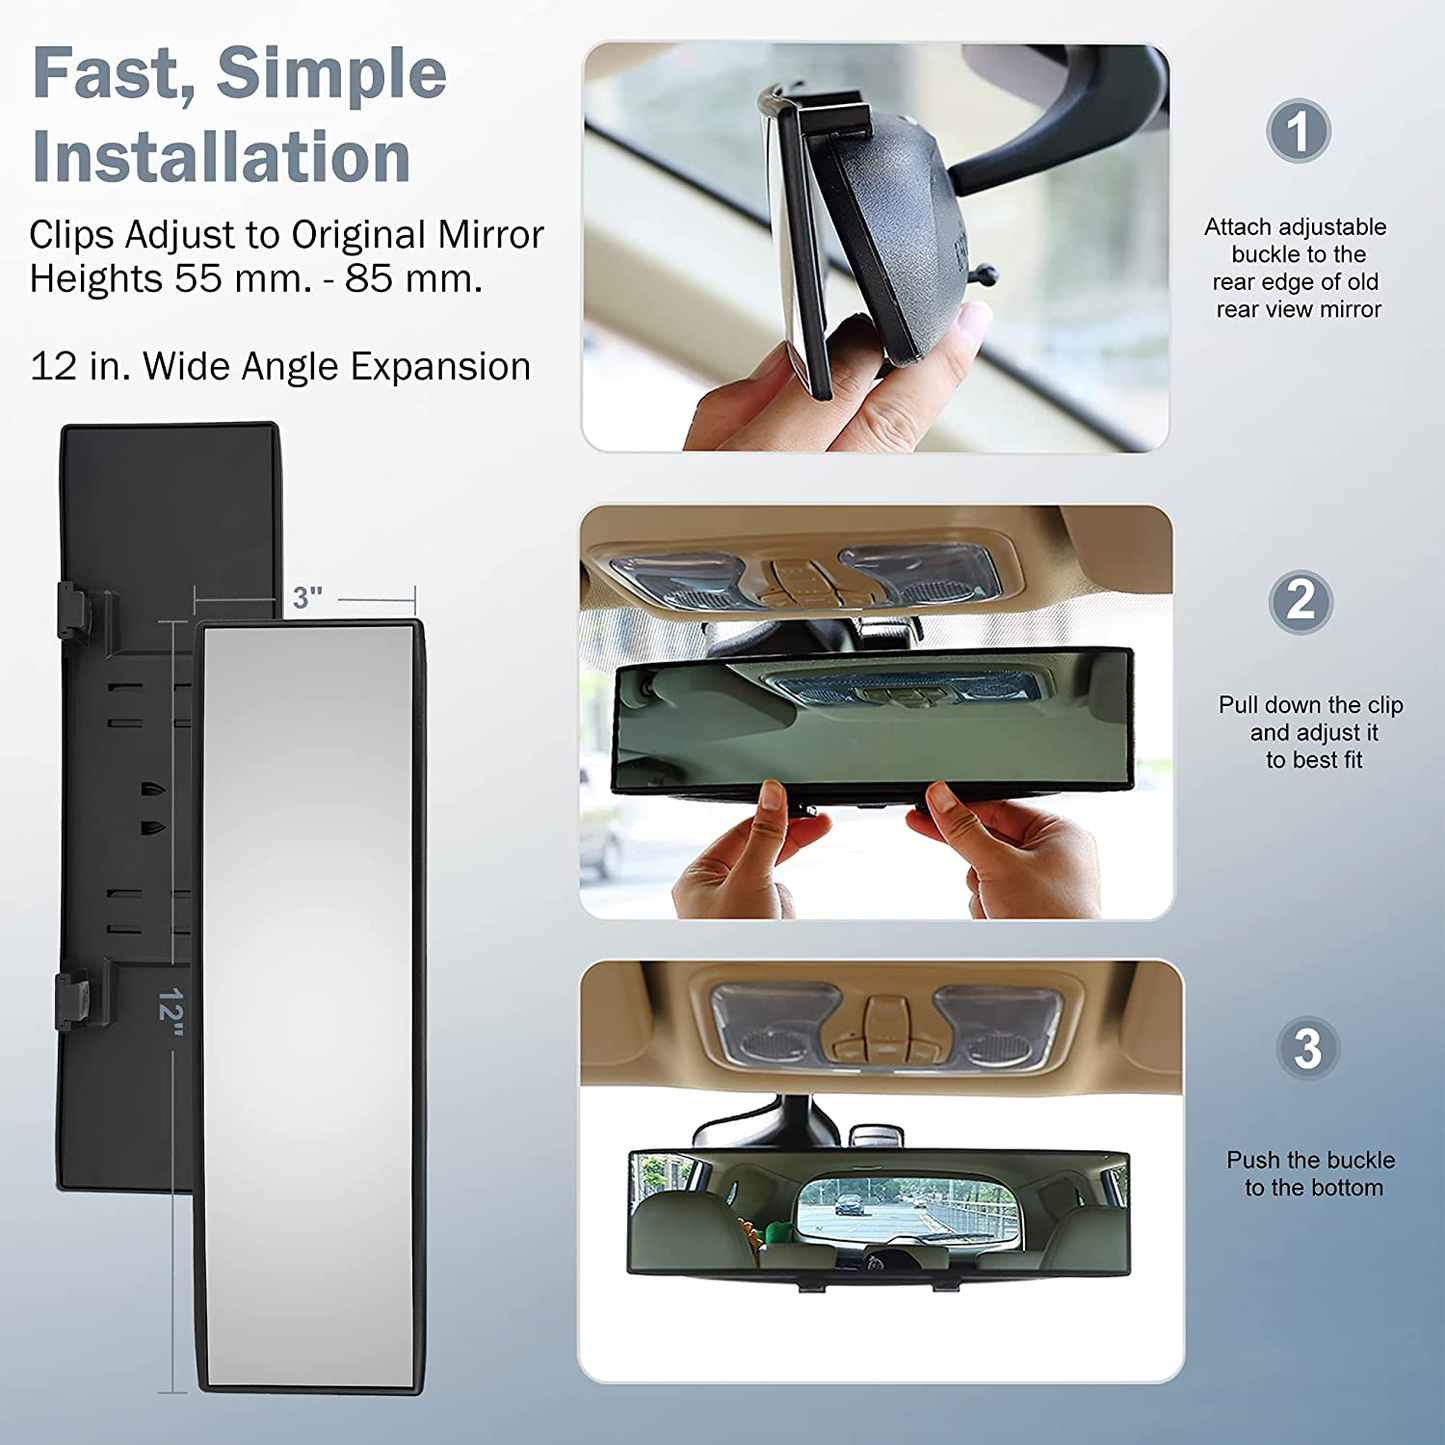 Verivue Mirrors Universal 12 Inch Interior Clip On Panoramic Rearview Mirror - Clear Tint - Wide Angle - For use in Car, SUV, Truck